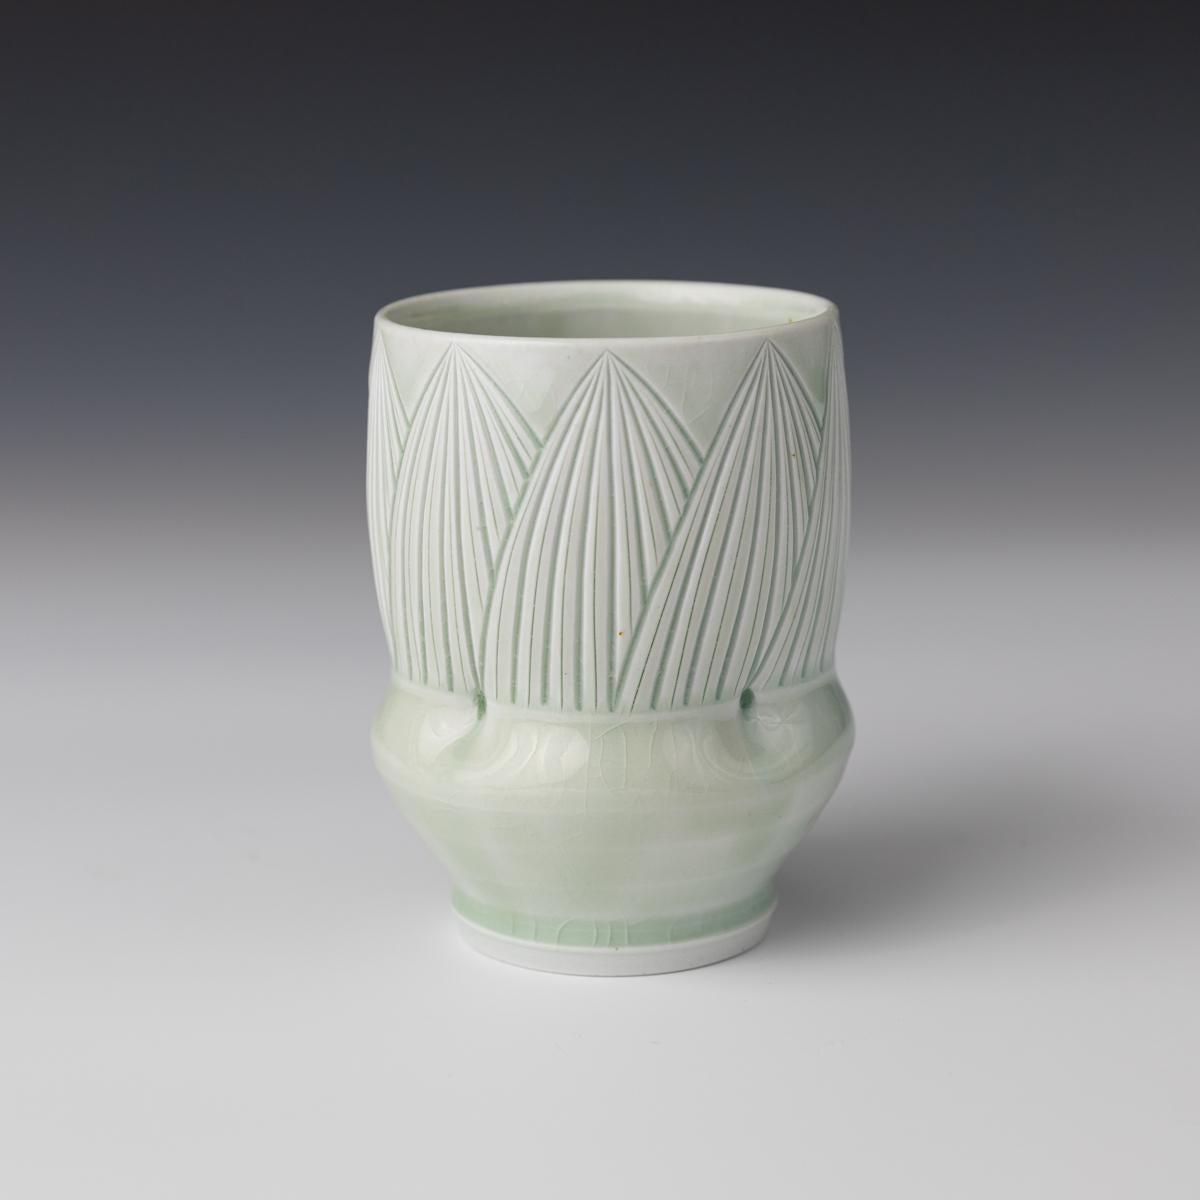 This elegant cup was created by Montana based ceramicist, Adam Field. The cup incorporates Field's love of ancient pottery entwined with the functionality of Colonial American Ware. Inspired by nature, many of Field's forms contain a variety of